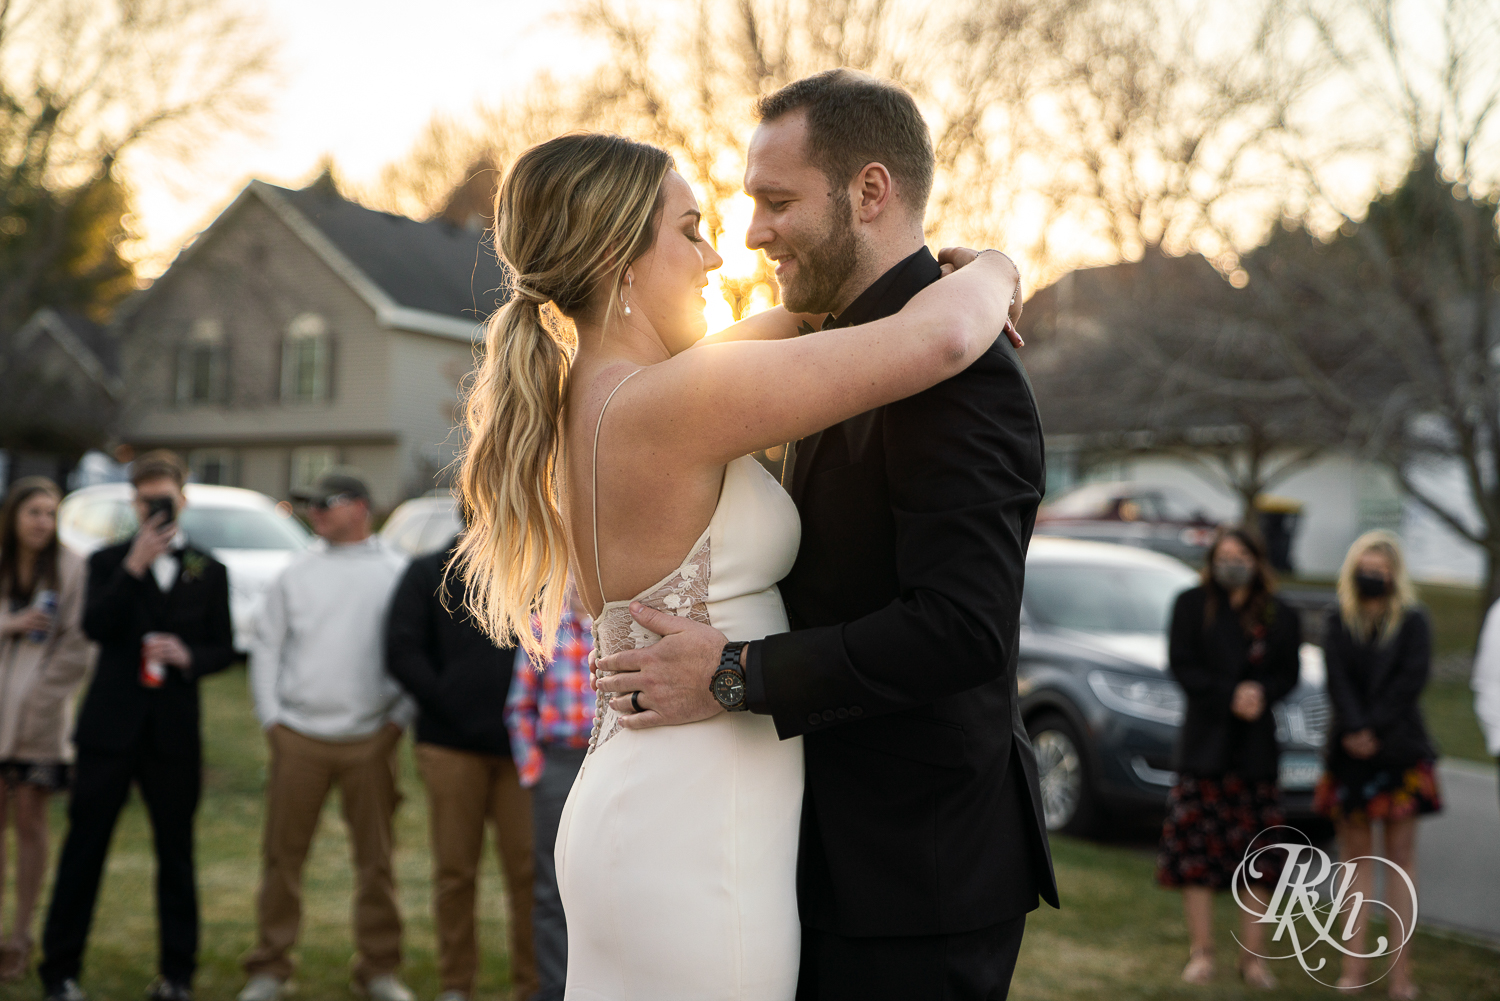 Bride and groom share first dance during sunset in their driveway in Eagan, Minnesota.